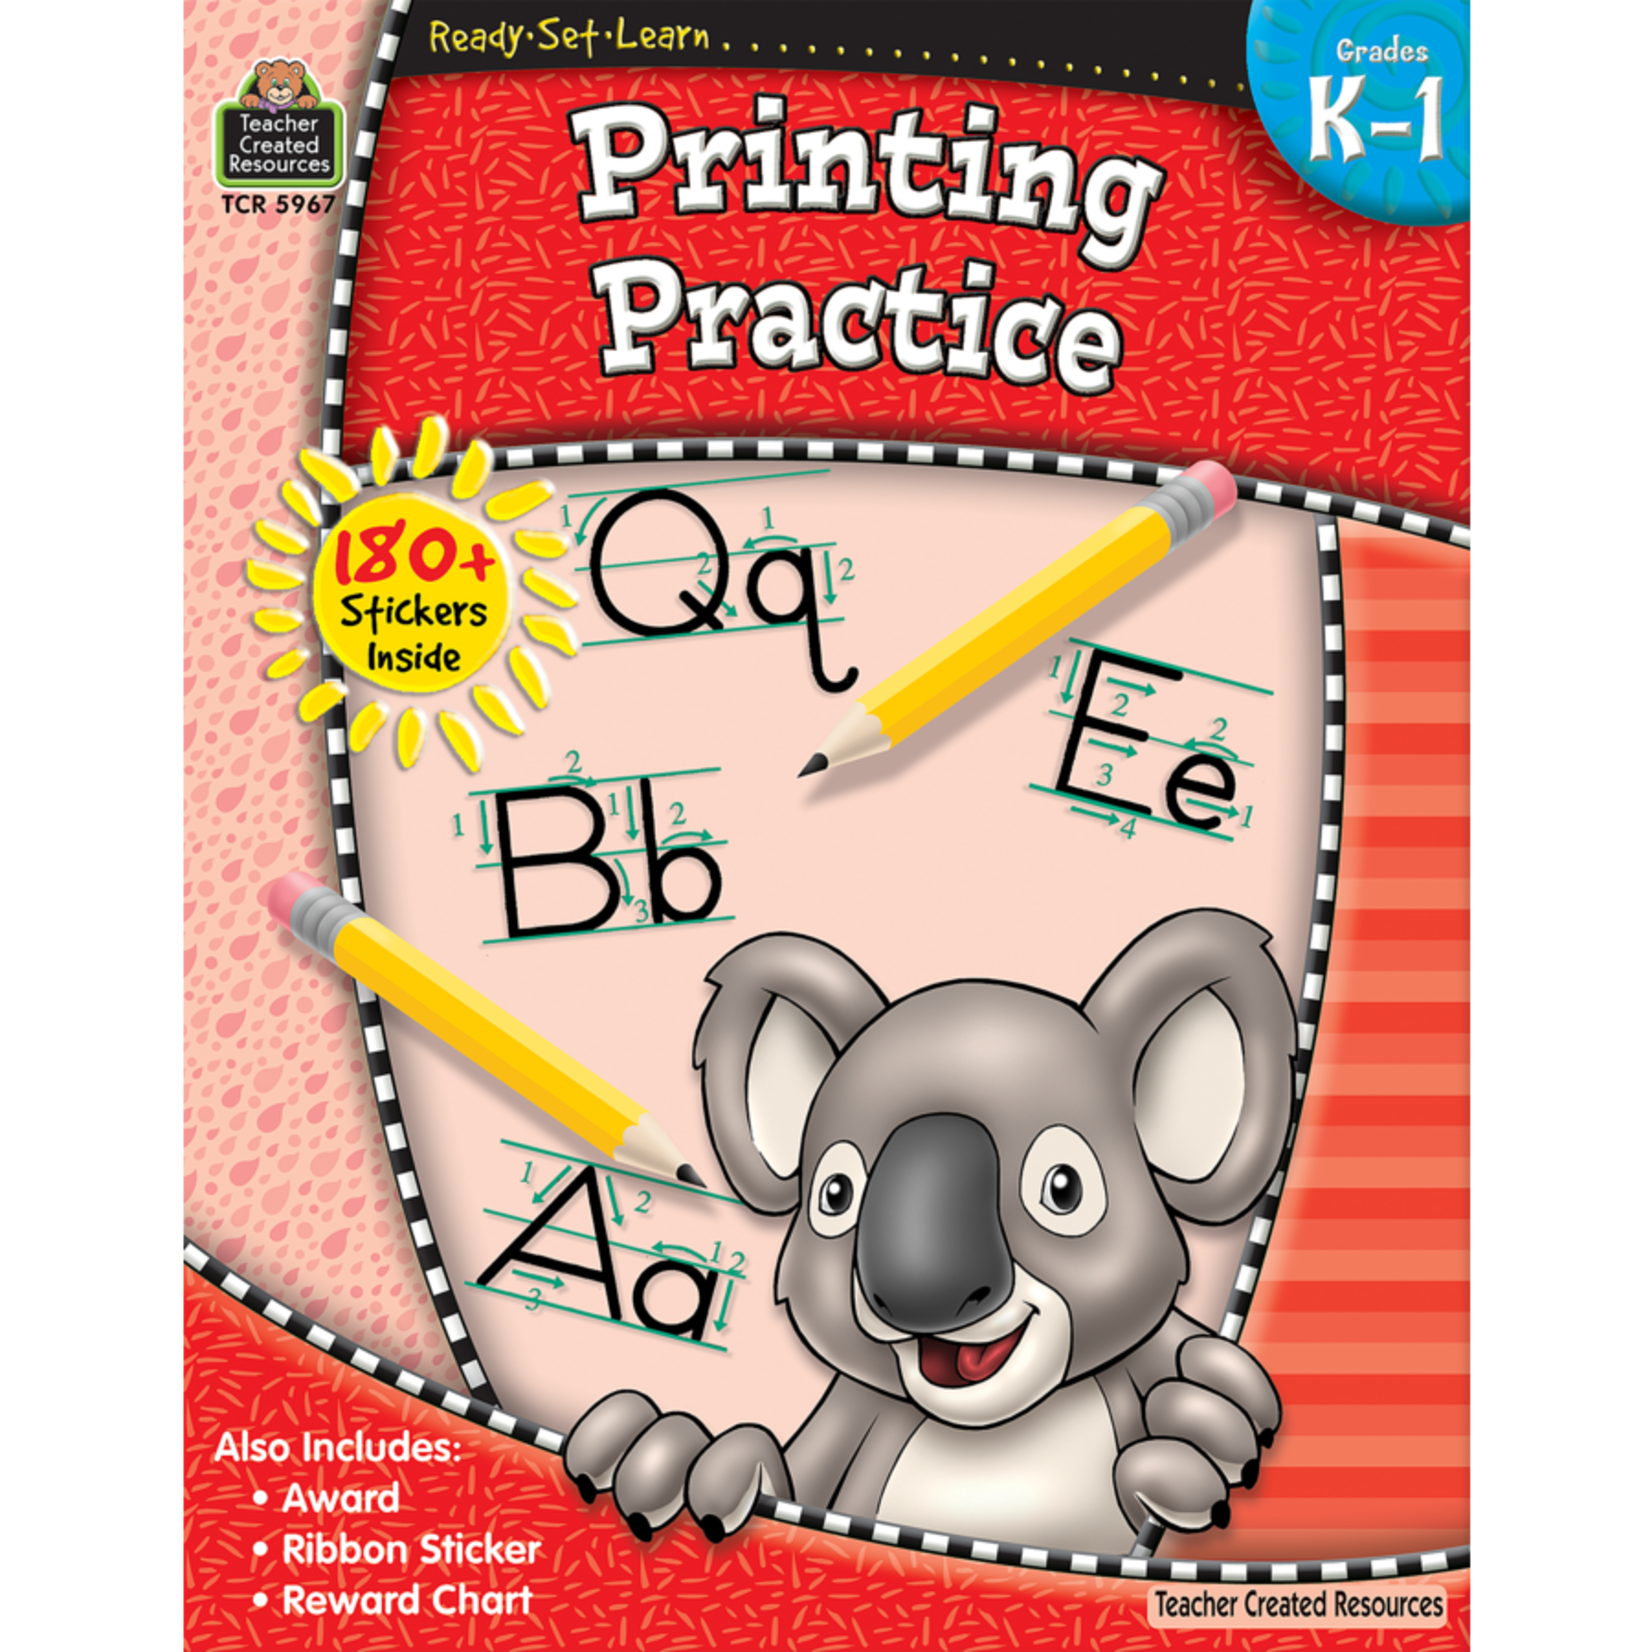 TEACHER CREATED RESOURCES READY-SET-LEAR: PRINTING PRACTICE GRADE K-1